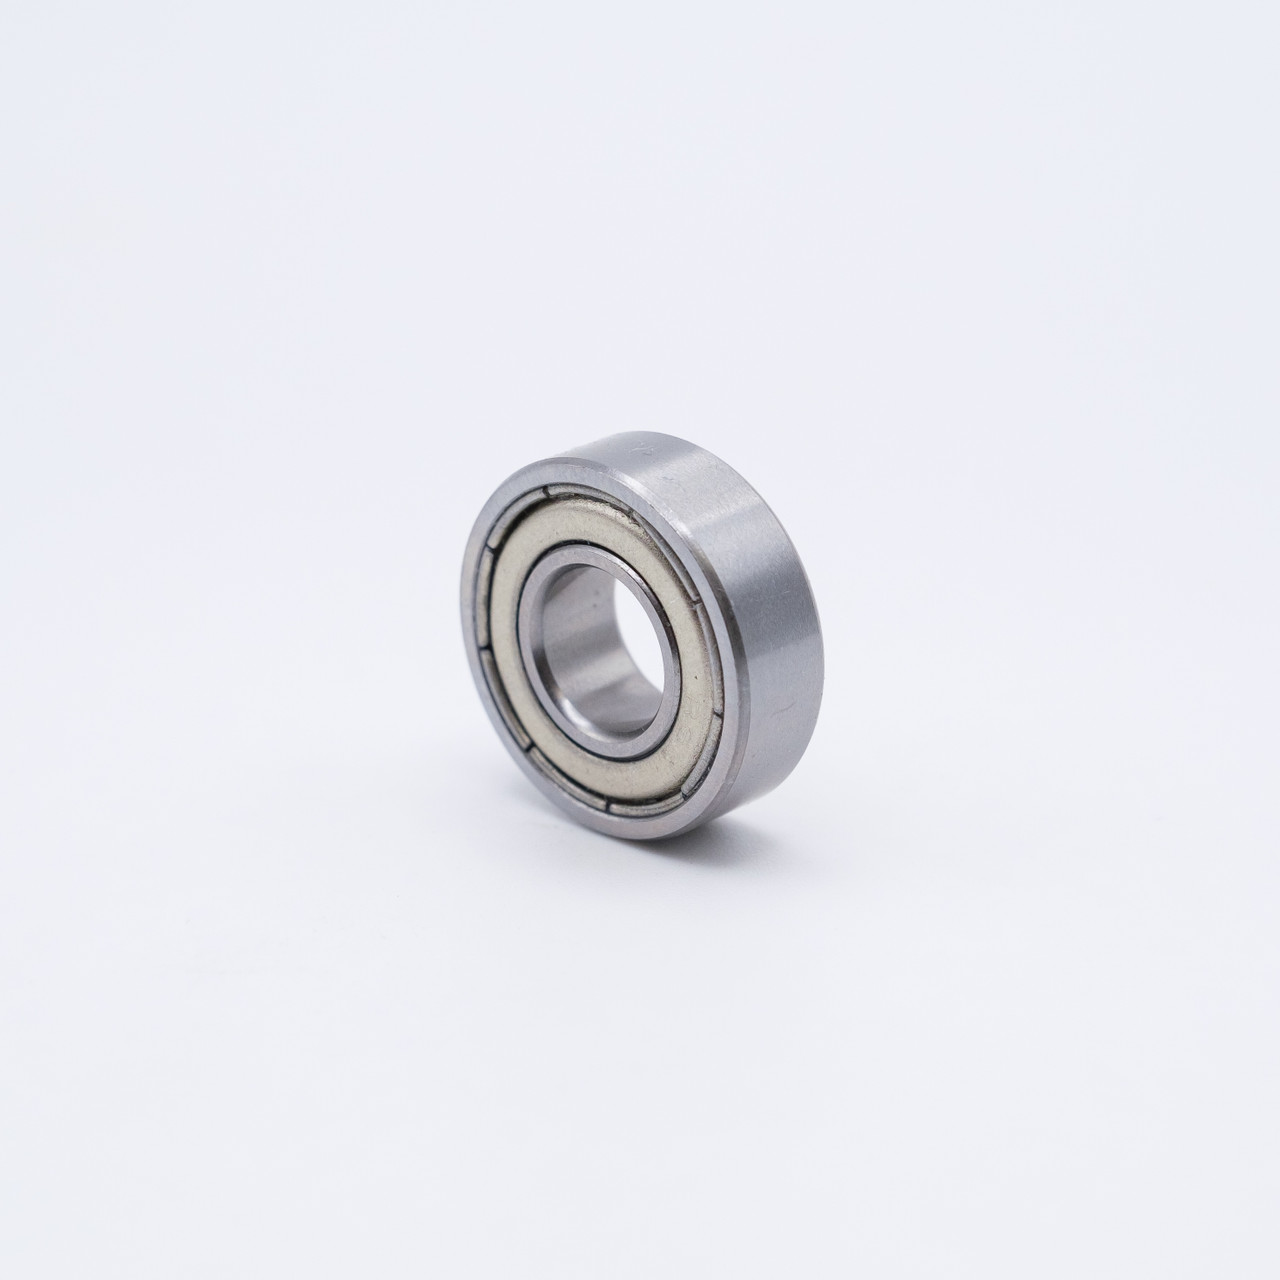 SR168-ZZ Stainless Steel Miniature Ball Bearing 1/4x3/8x1/8 Angled View